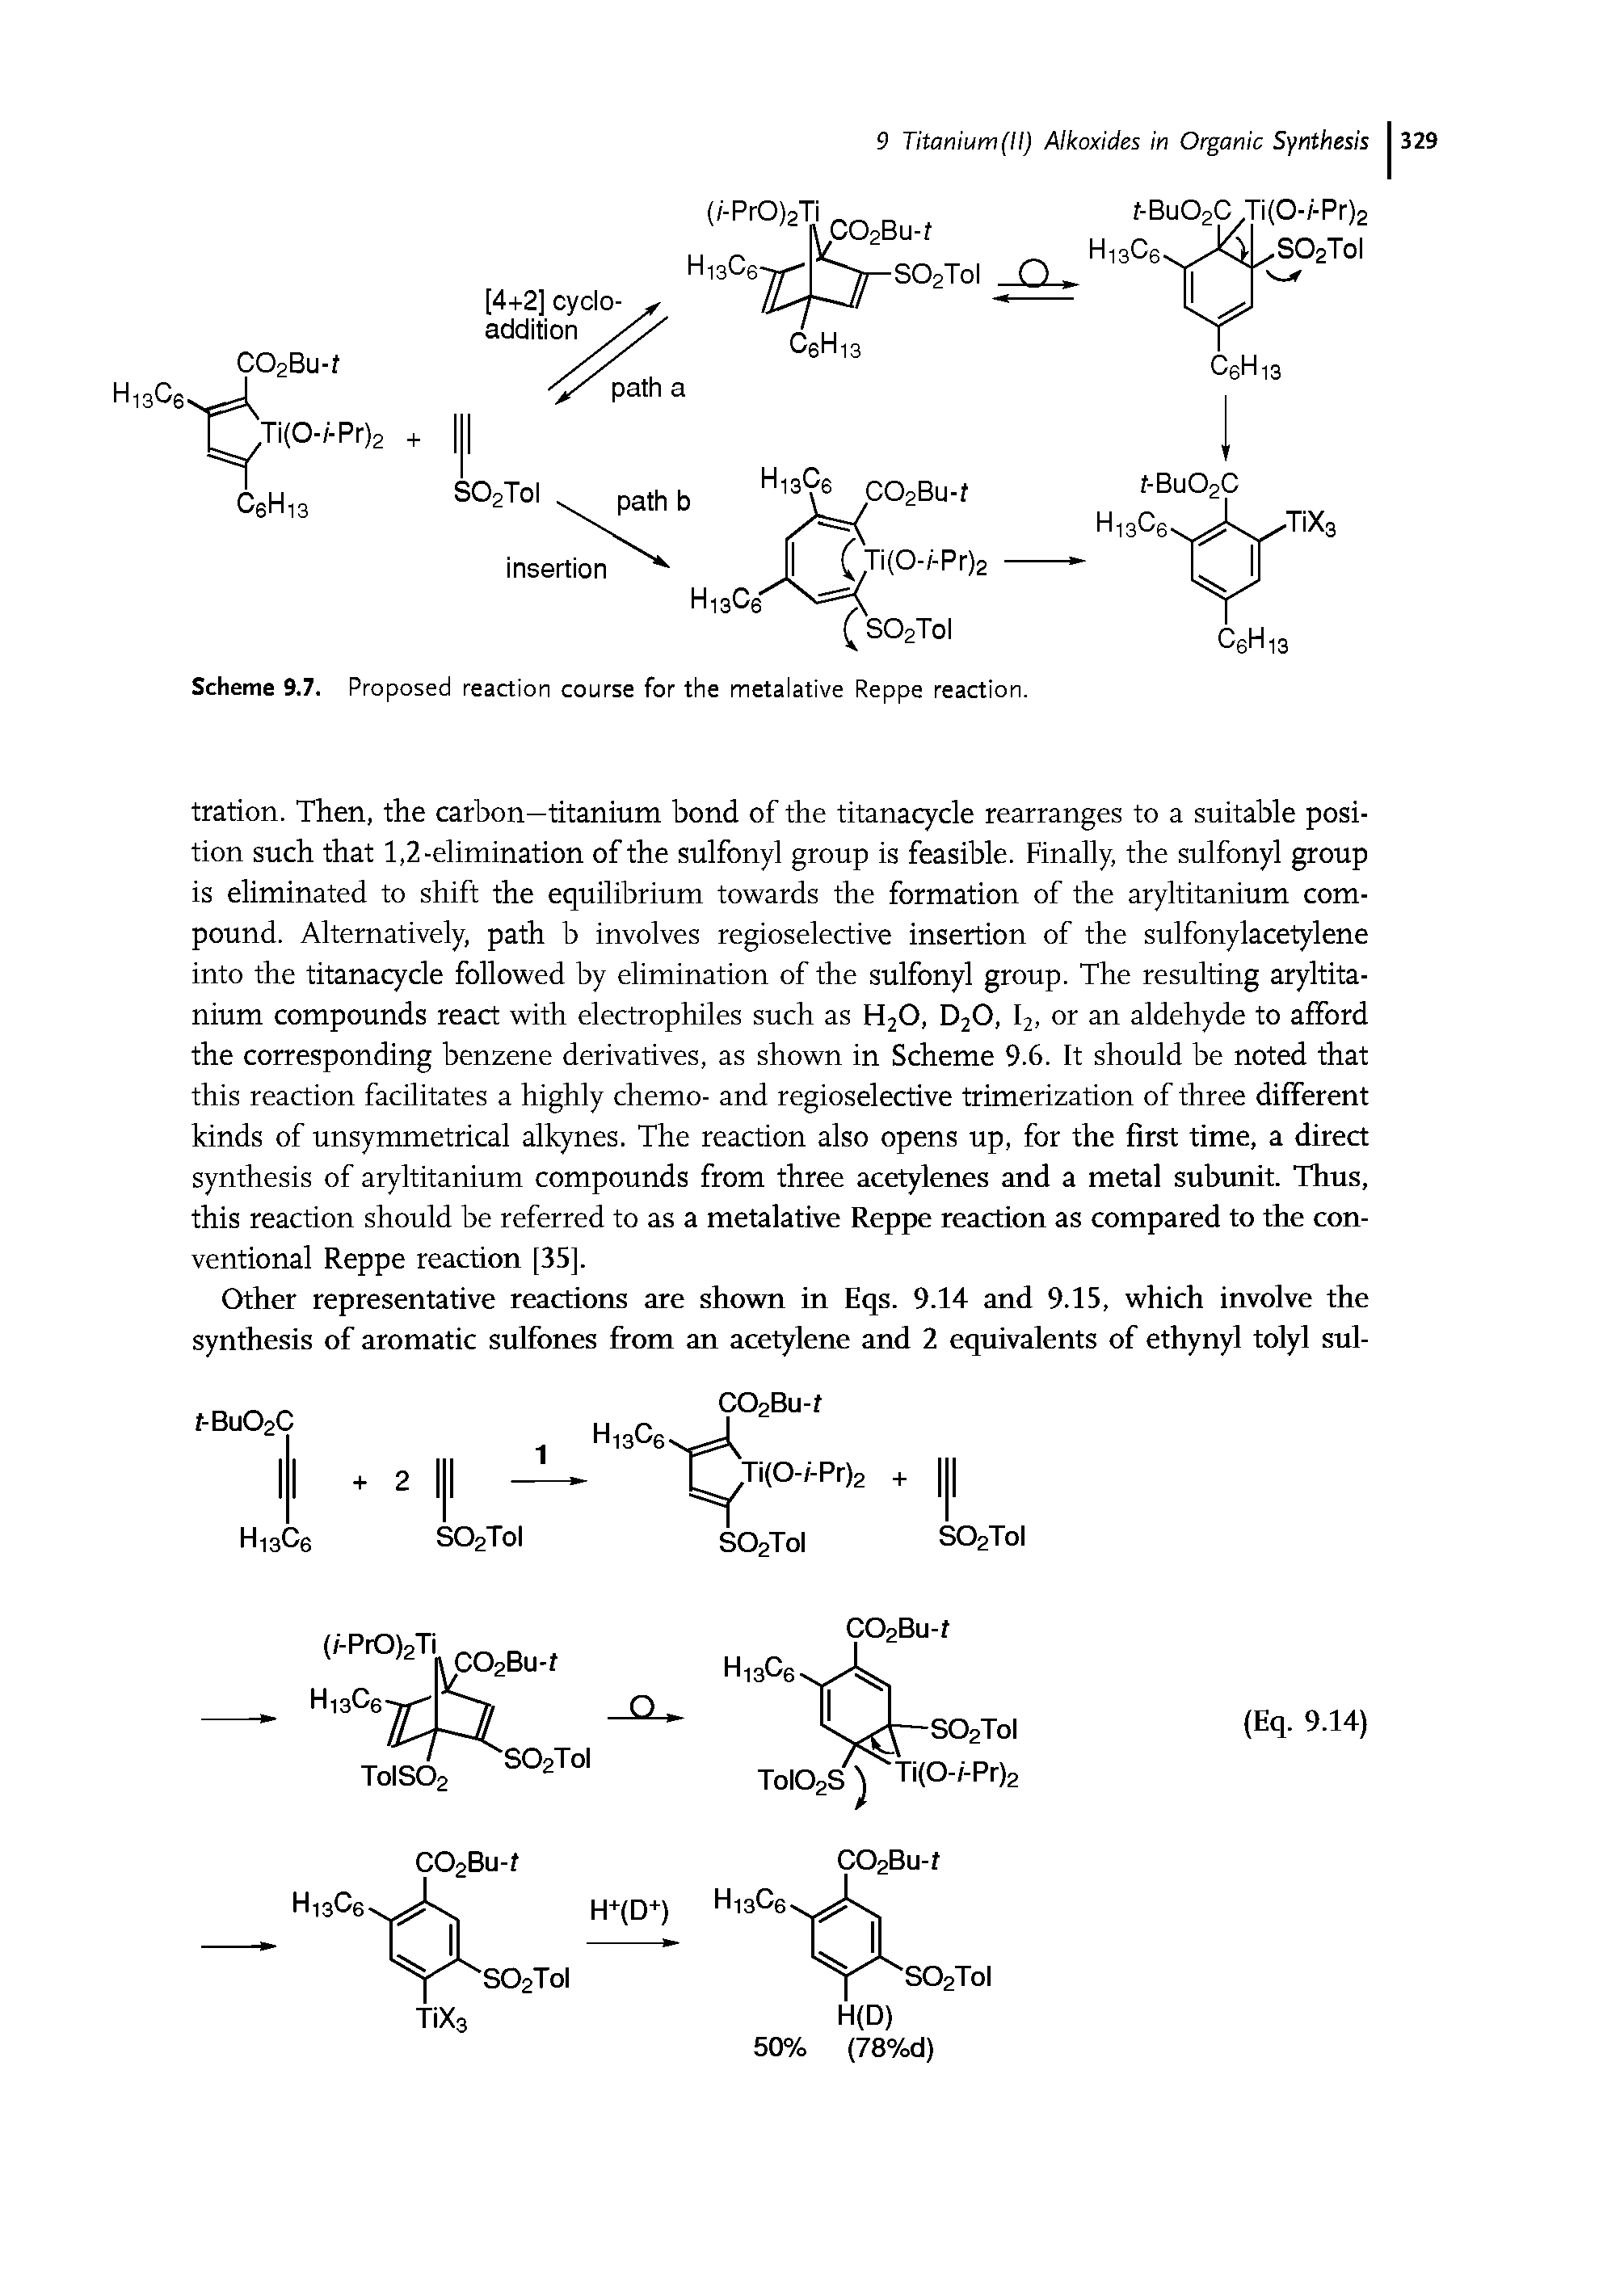 Scheme 9.7. Proposed reaction course for the metalative Reppe reaction.